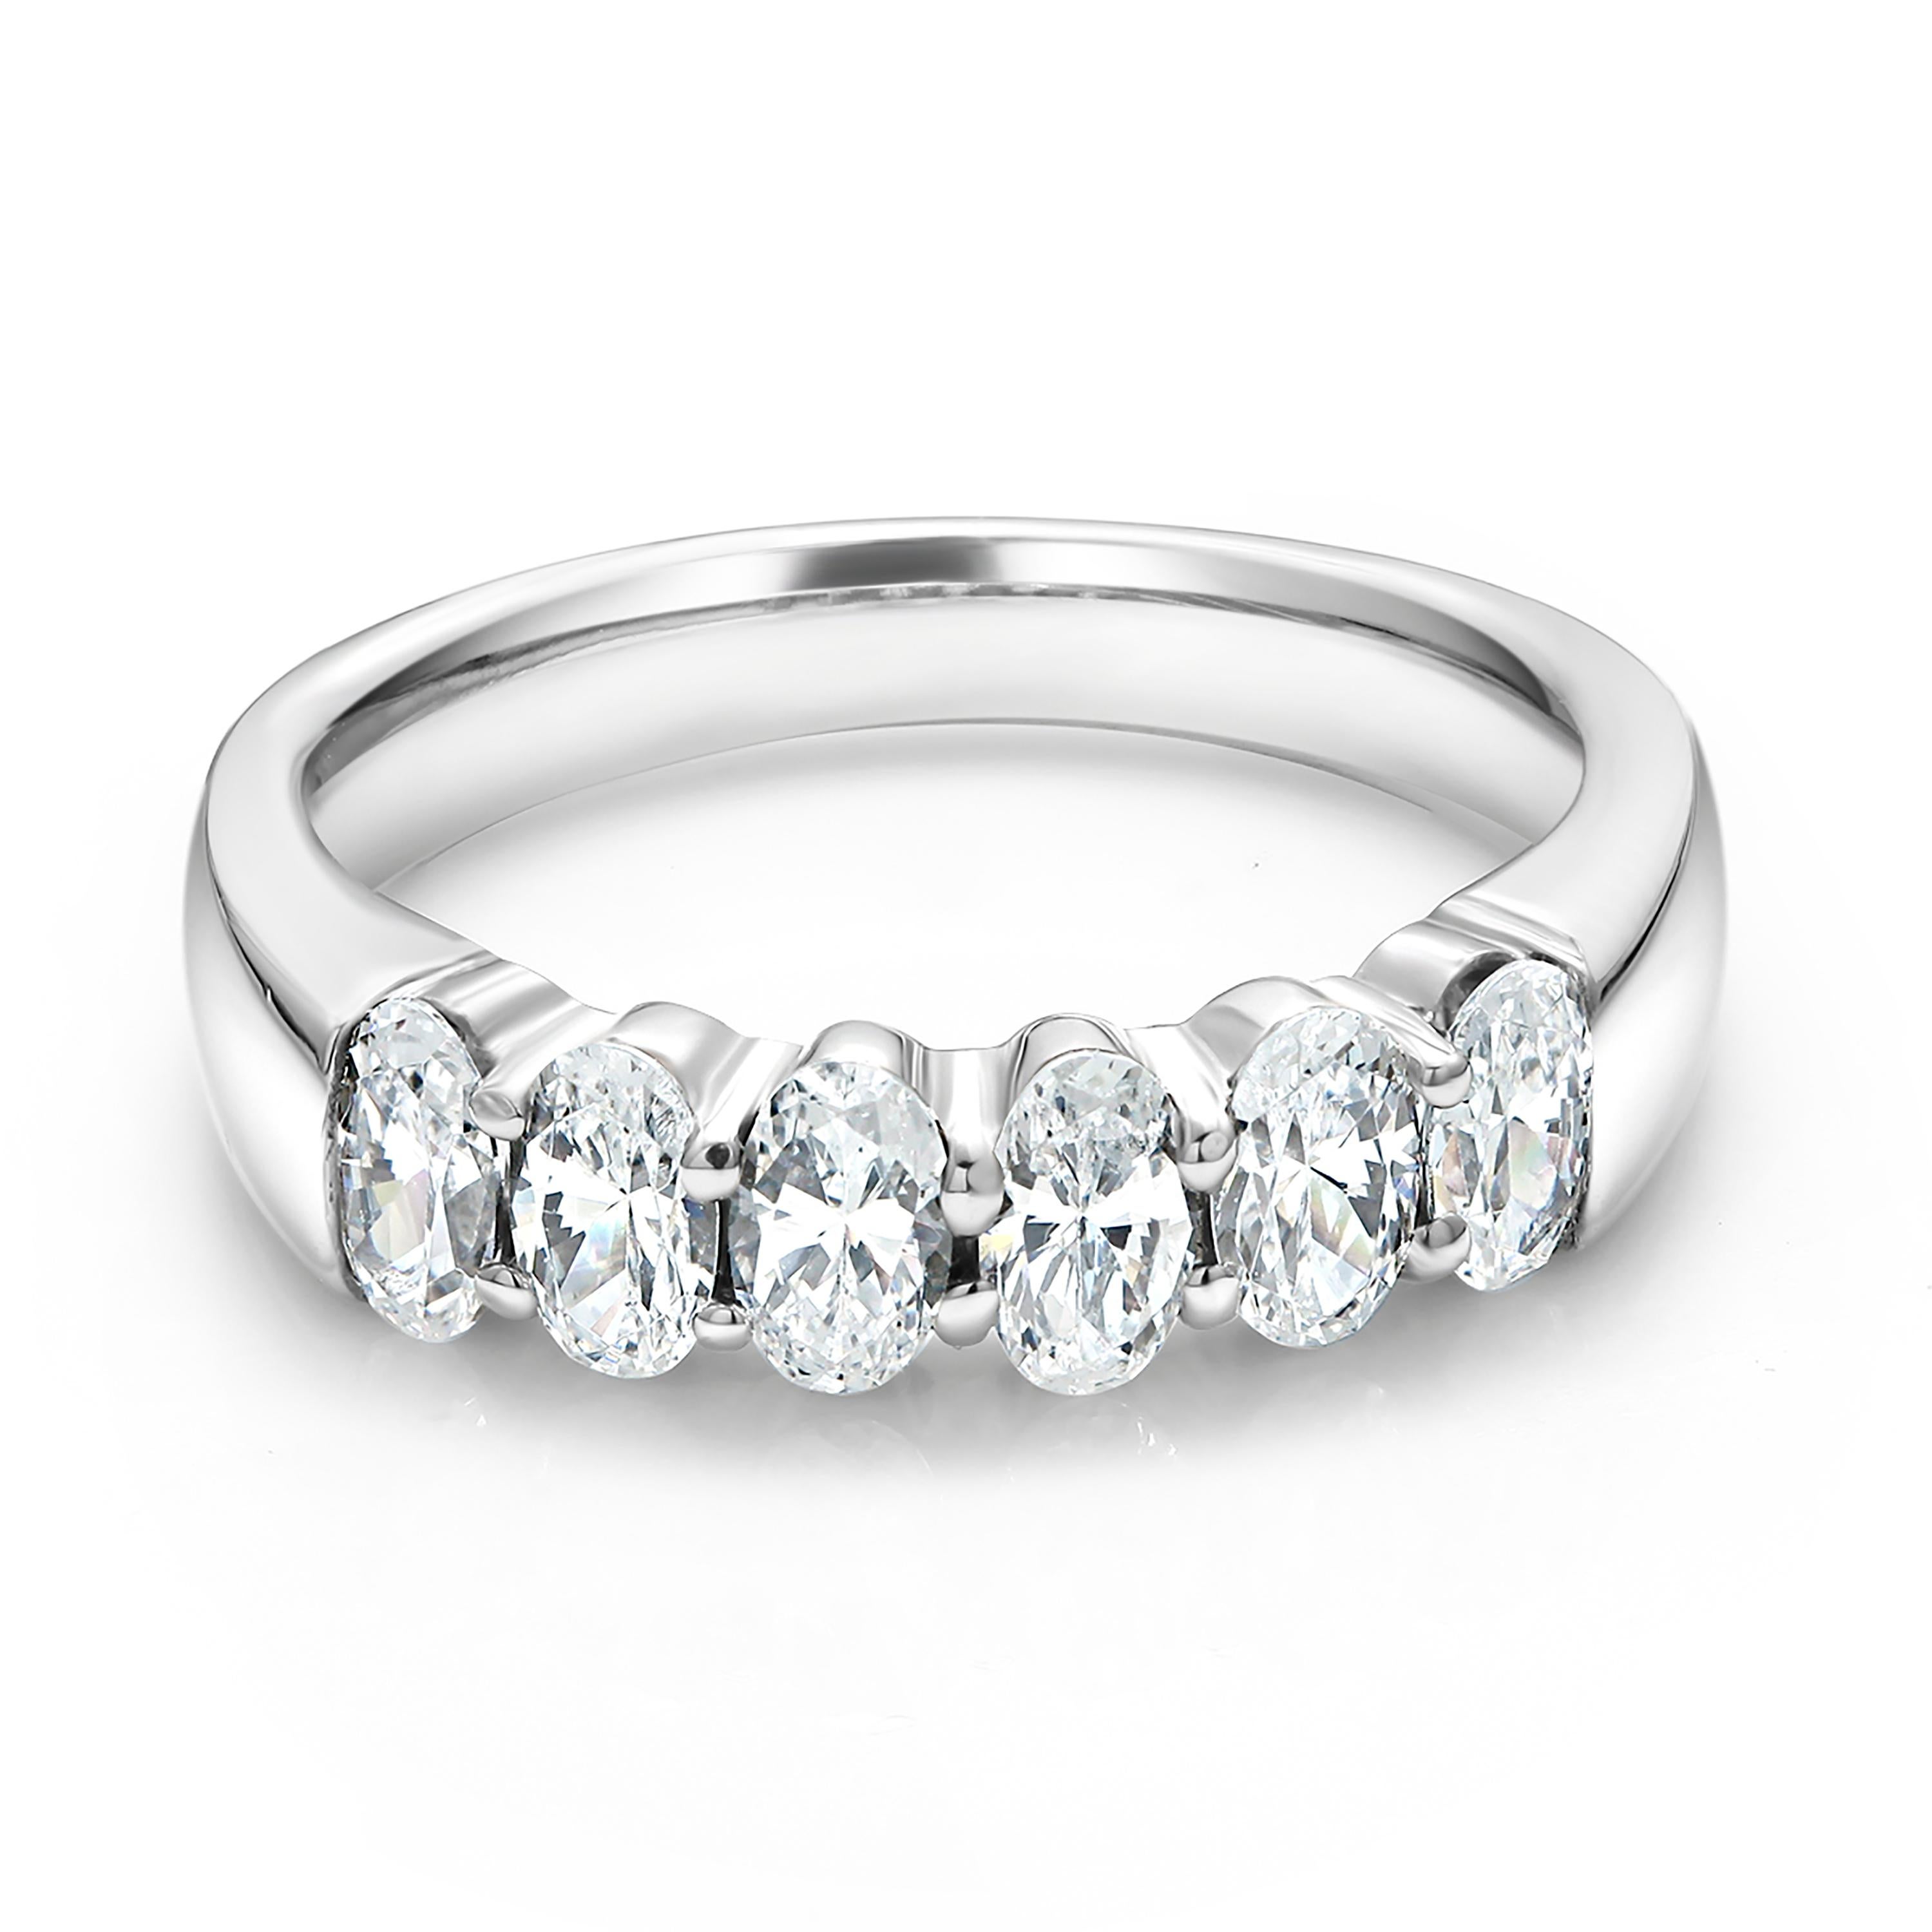 18 Karats white gold oval diamond prong set partial ring
Six oval diamond weighing 1.50 carat 
Each diamond measures 5x3 millimeter, weighing 0.27 carat 
Made to order in special size
Two to three weeks delivery 
New Ring
Available in full finger